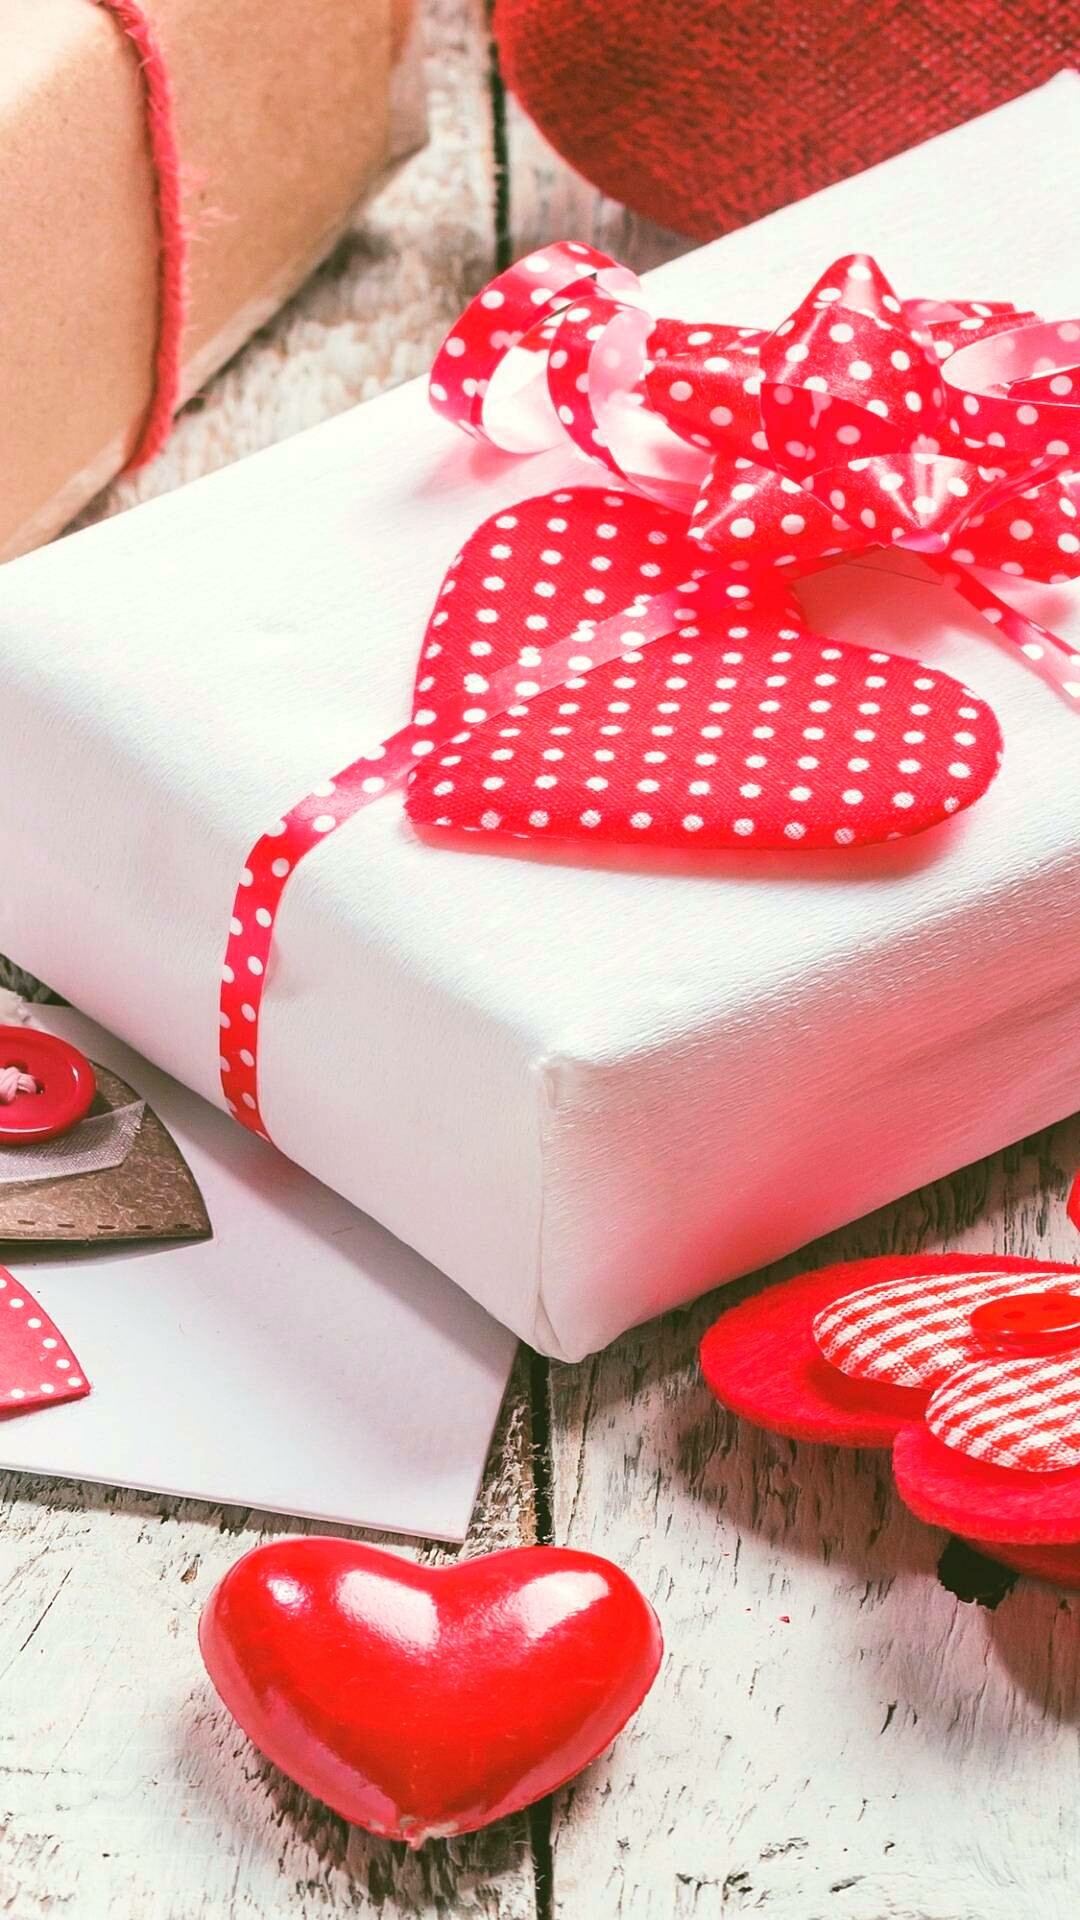 Valentine's Day, HD love wallpapers, 1080x1920 Full HD Phone